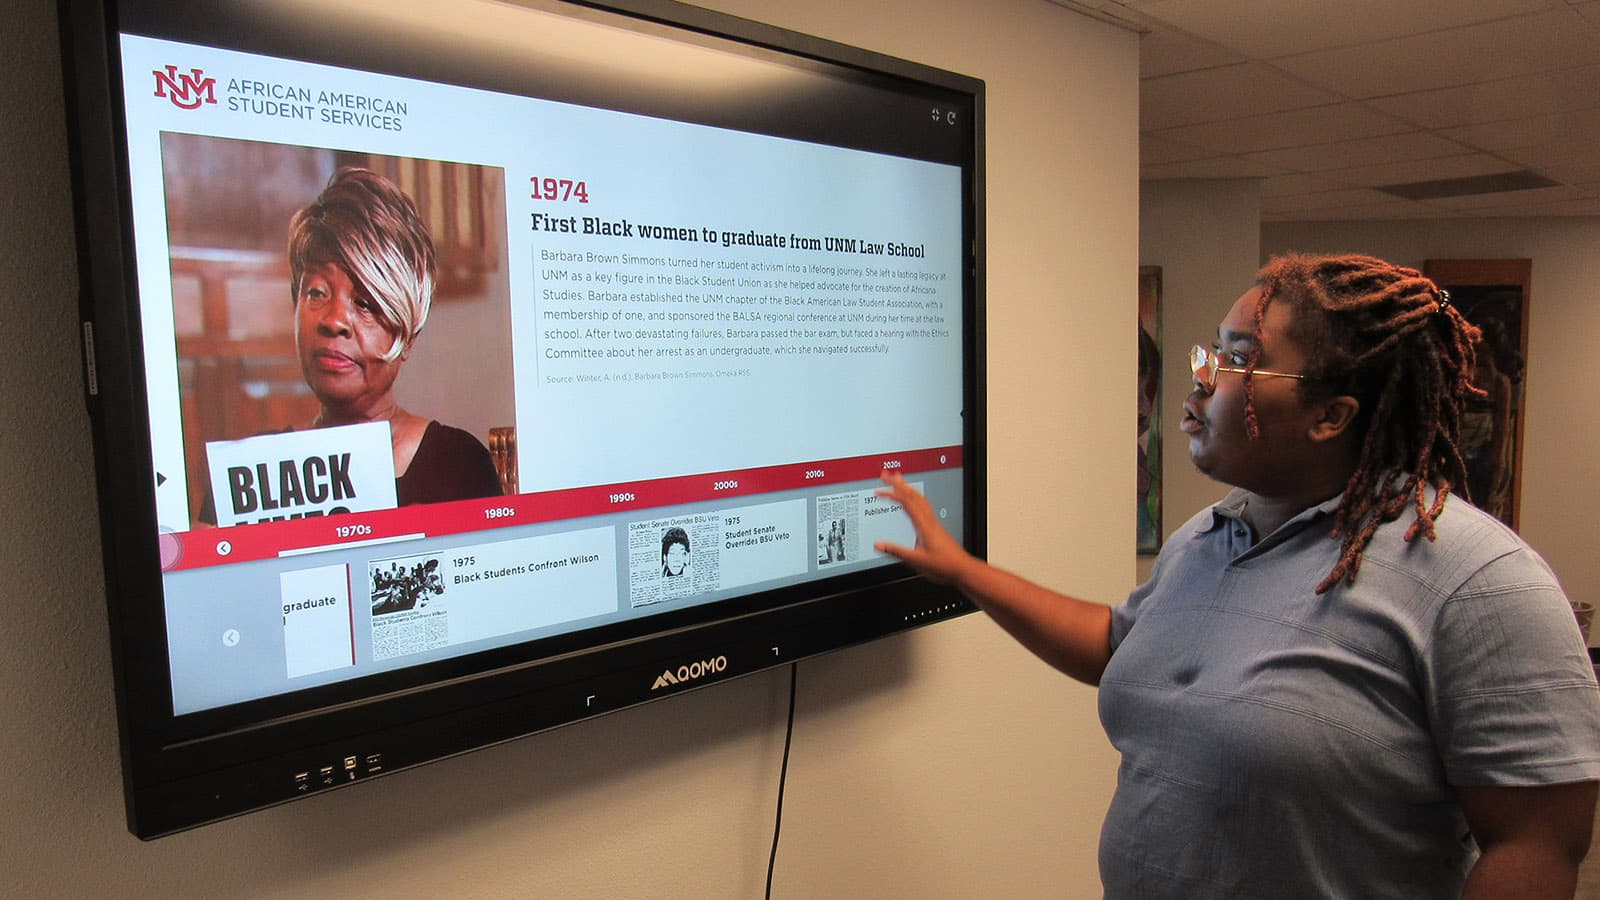 New project reveals Black history at UNM